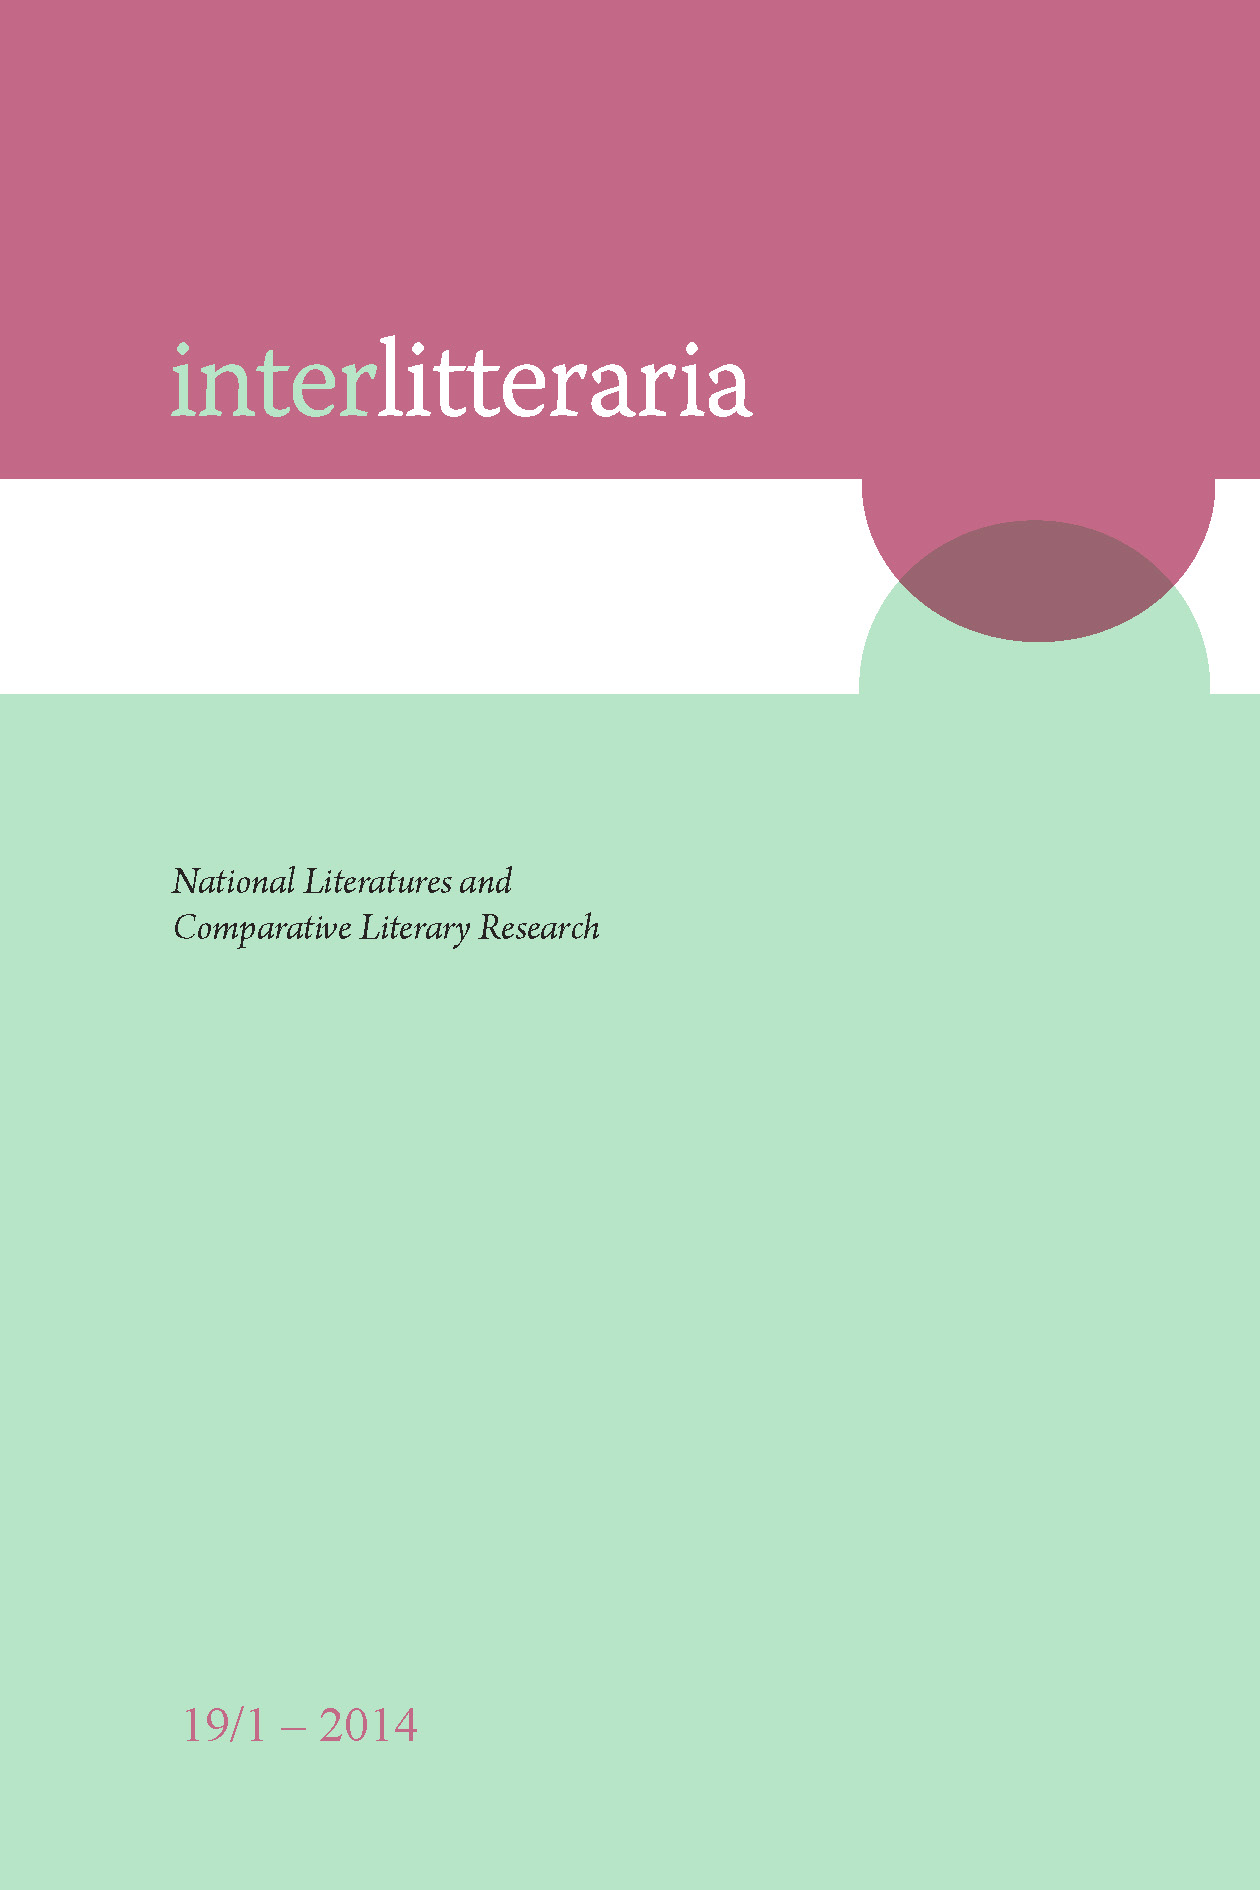 					View Vol. 19 No. 1 (2014): National Literatures and Comparative Literary Research
				